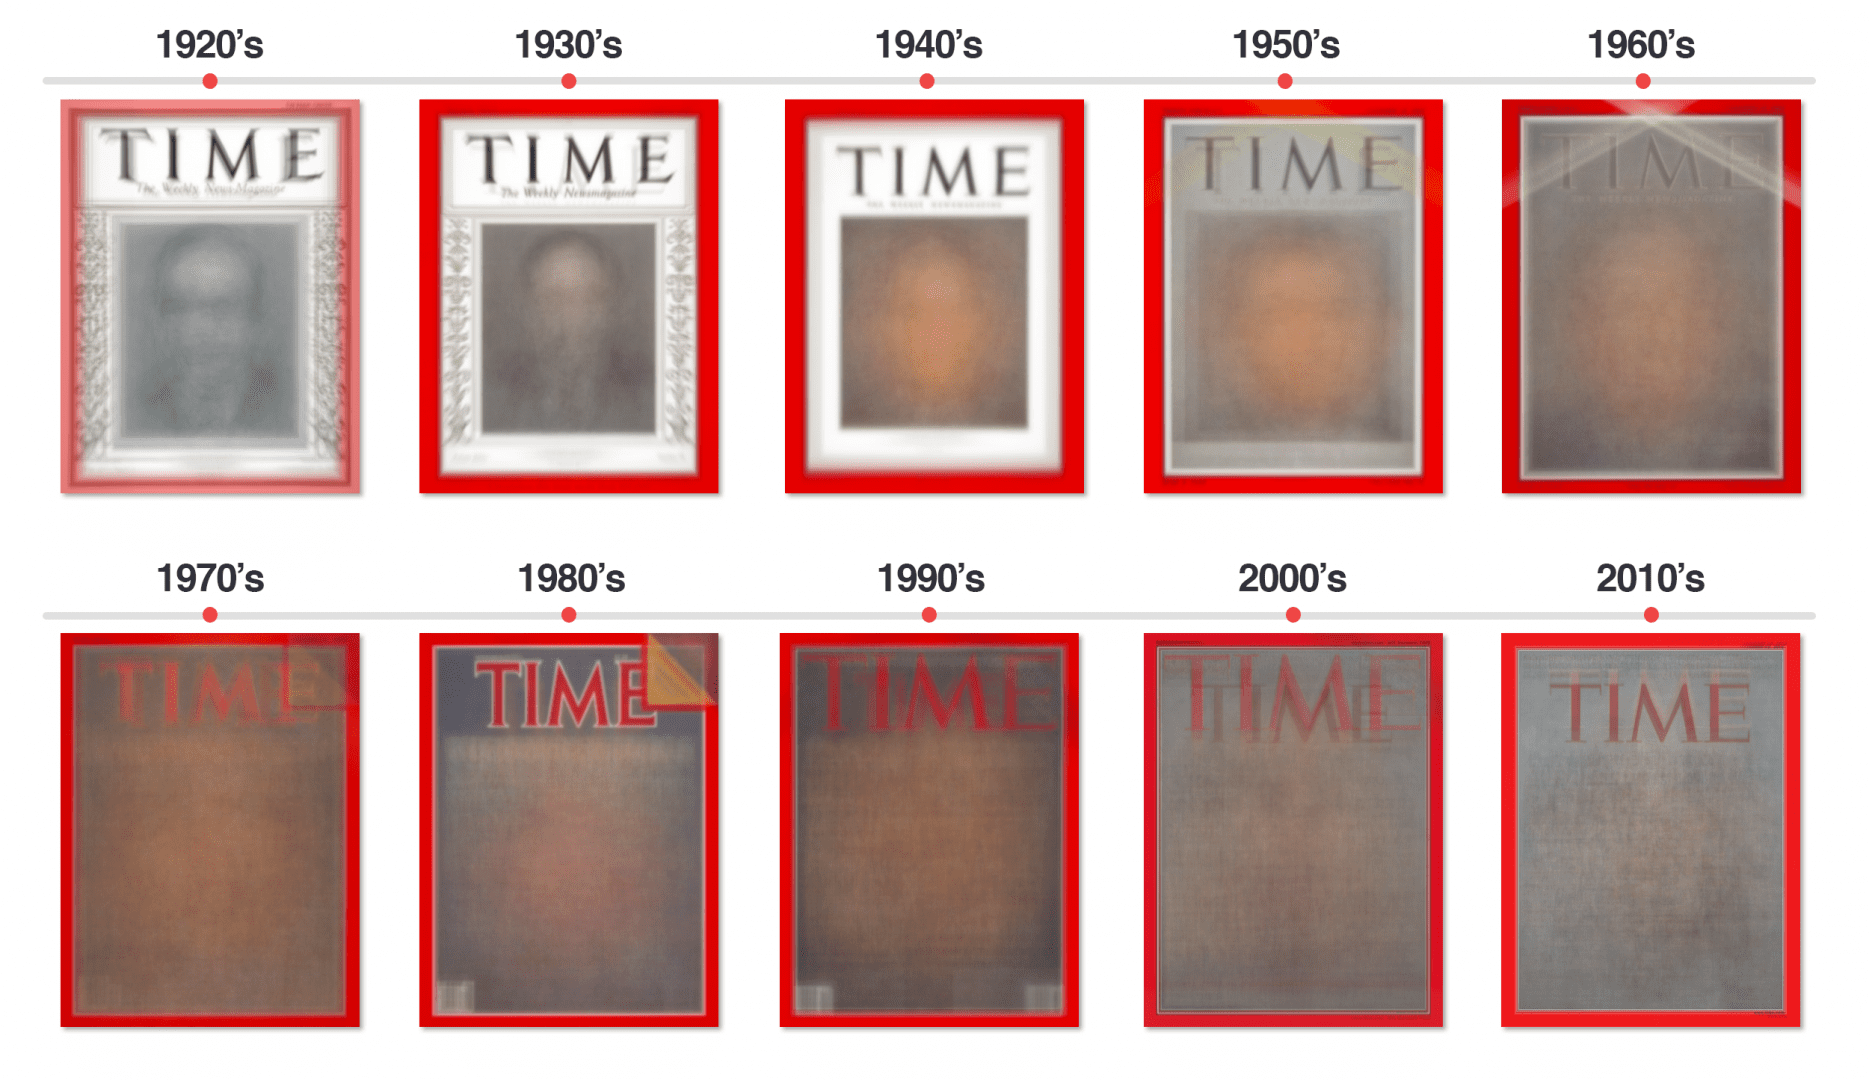 Analyzing 91 years of Time magazine covers for visual trends LaptrinhX